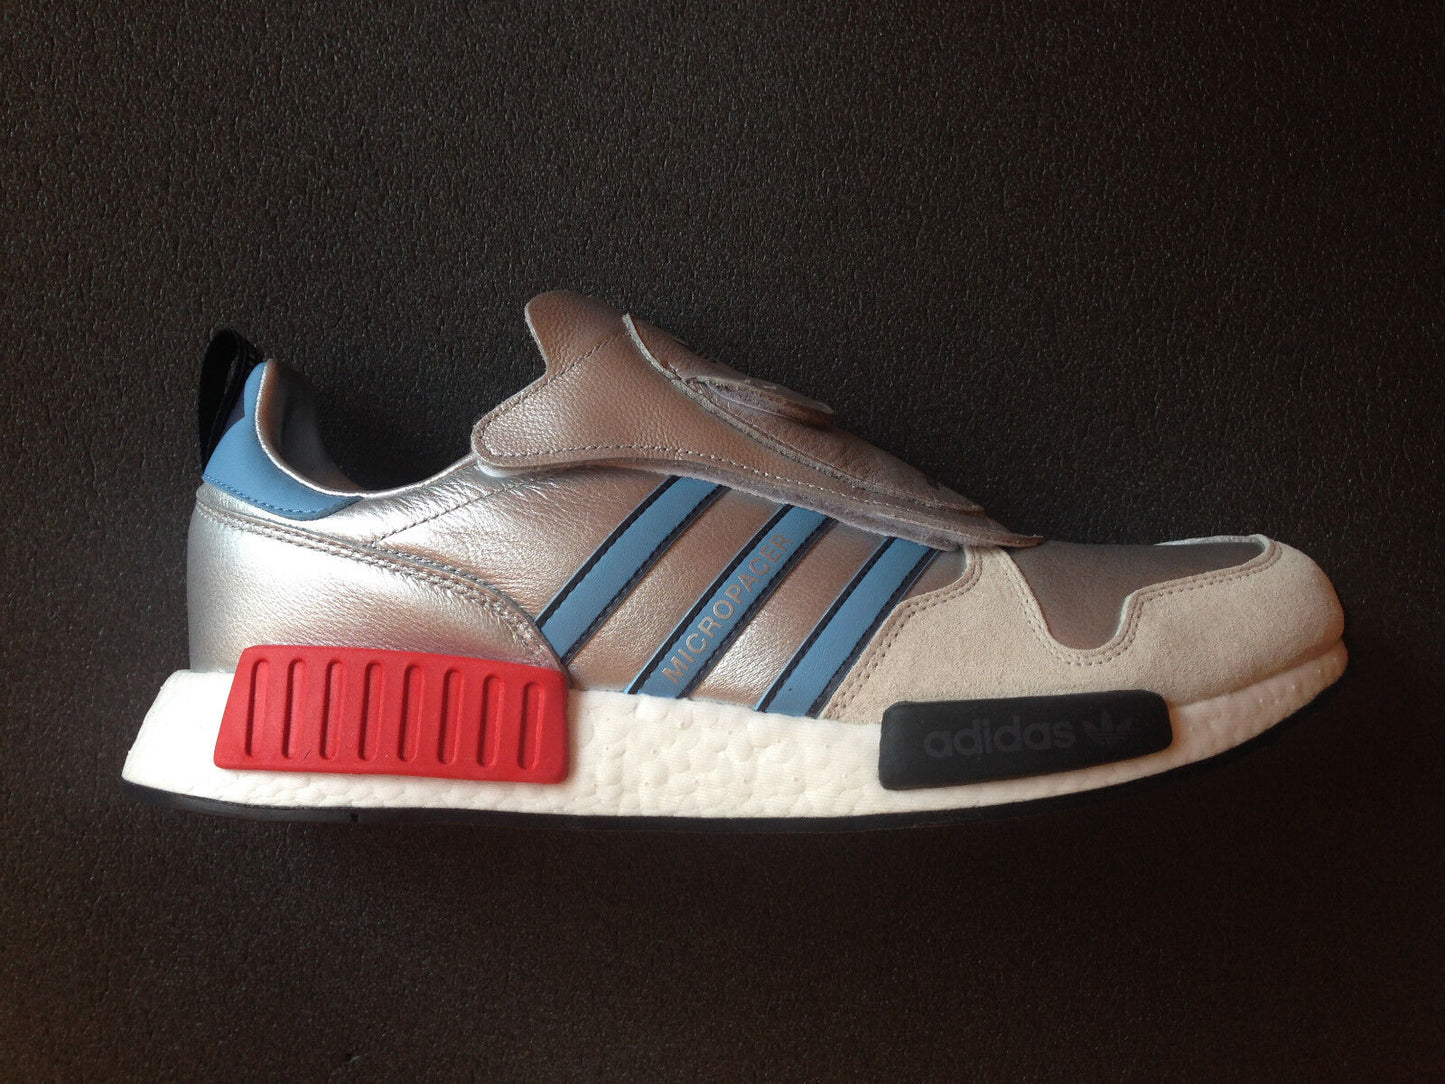 Adidas Micropacer x R1 2018 vintage colourway new in box US 12 UK 11,5 FR 46 ⅔